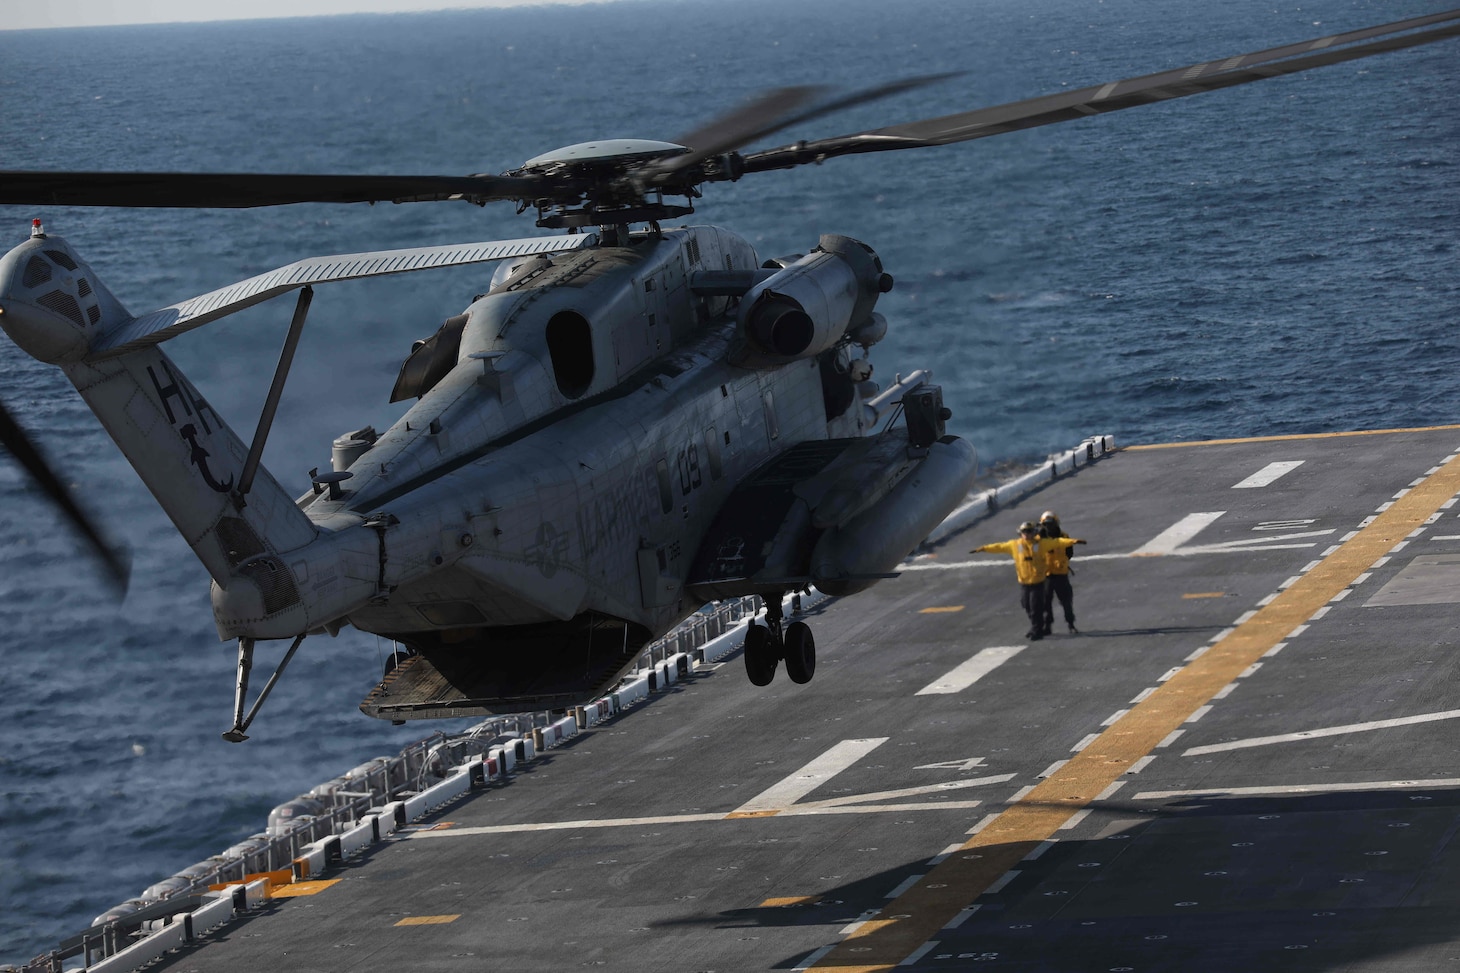 A CH-53 Super Stallion from Marine Heavy Helicopter Squadron (HMH) 366 lands on the flight deck of the amphibious assault ship USS Bataan (LHD 5), April 27, 2022.